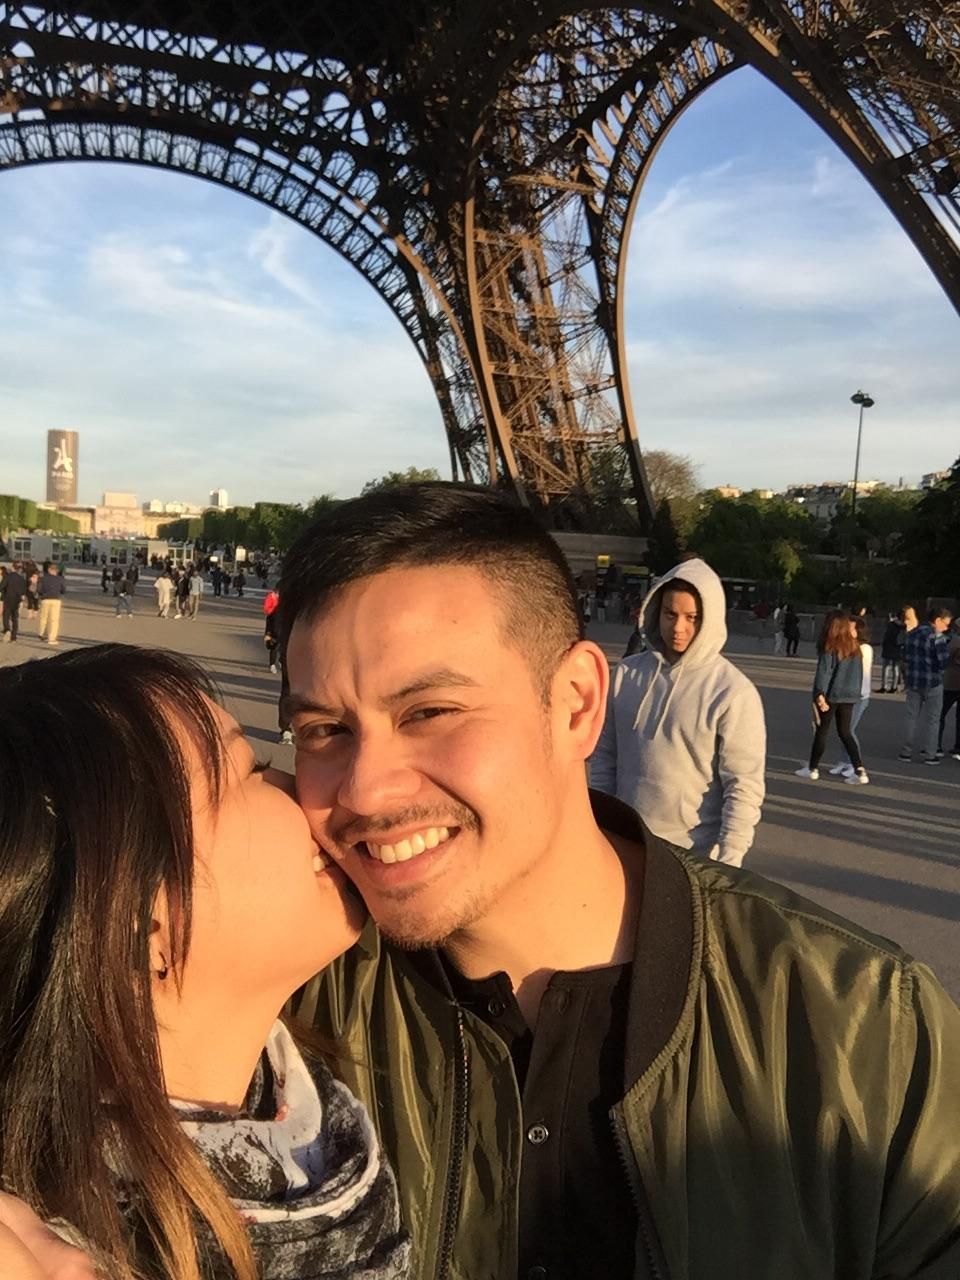 Visiting Paris with my boyfriend and his brother. This picture pretty much sums up how it's going so far.